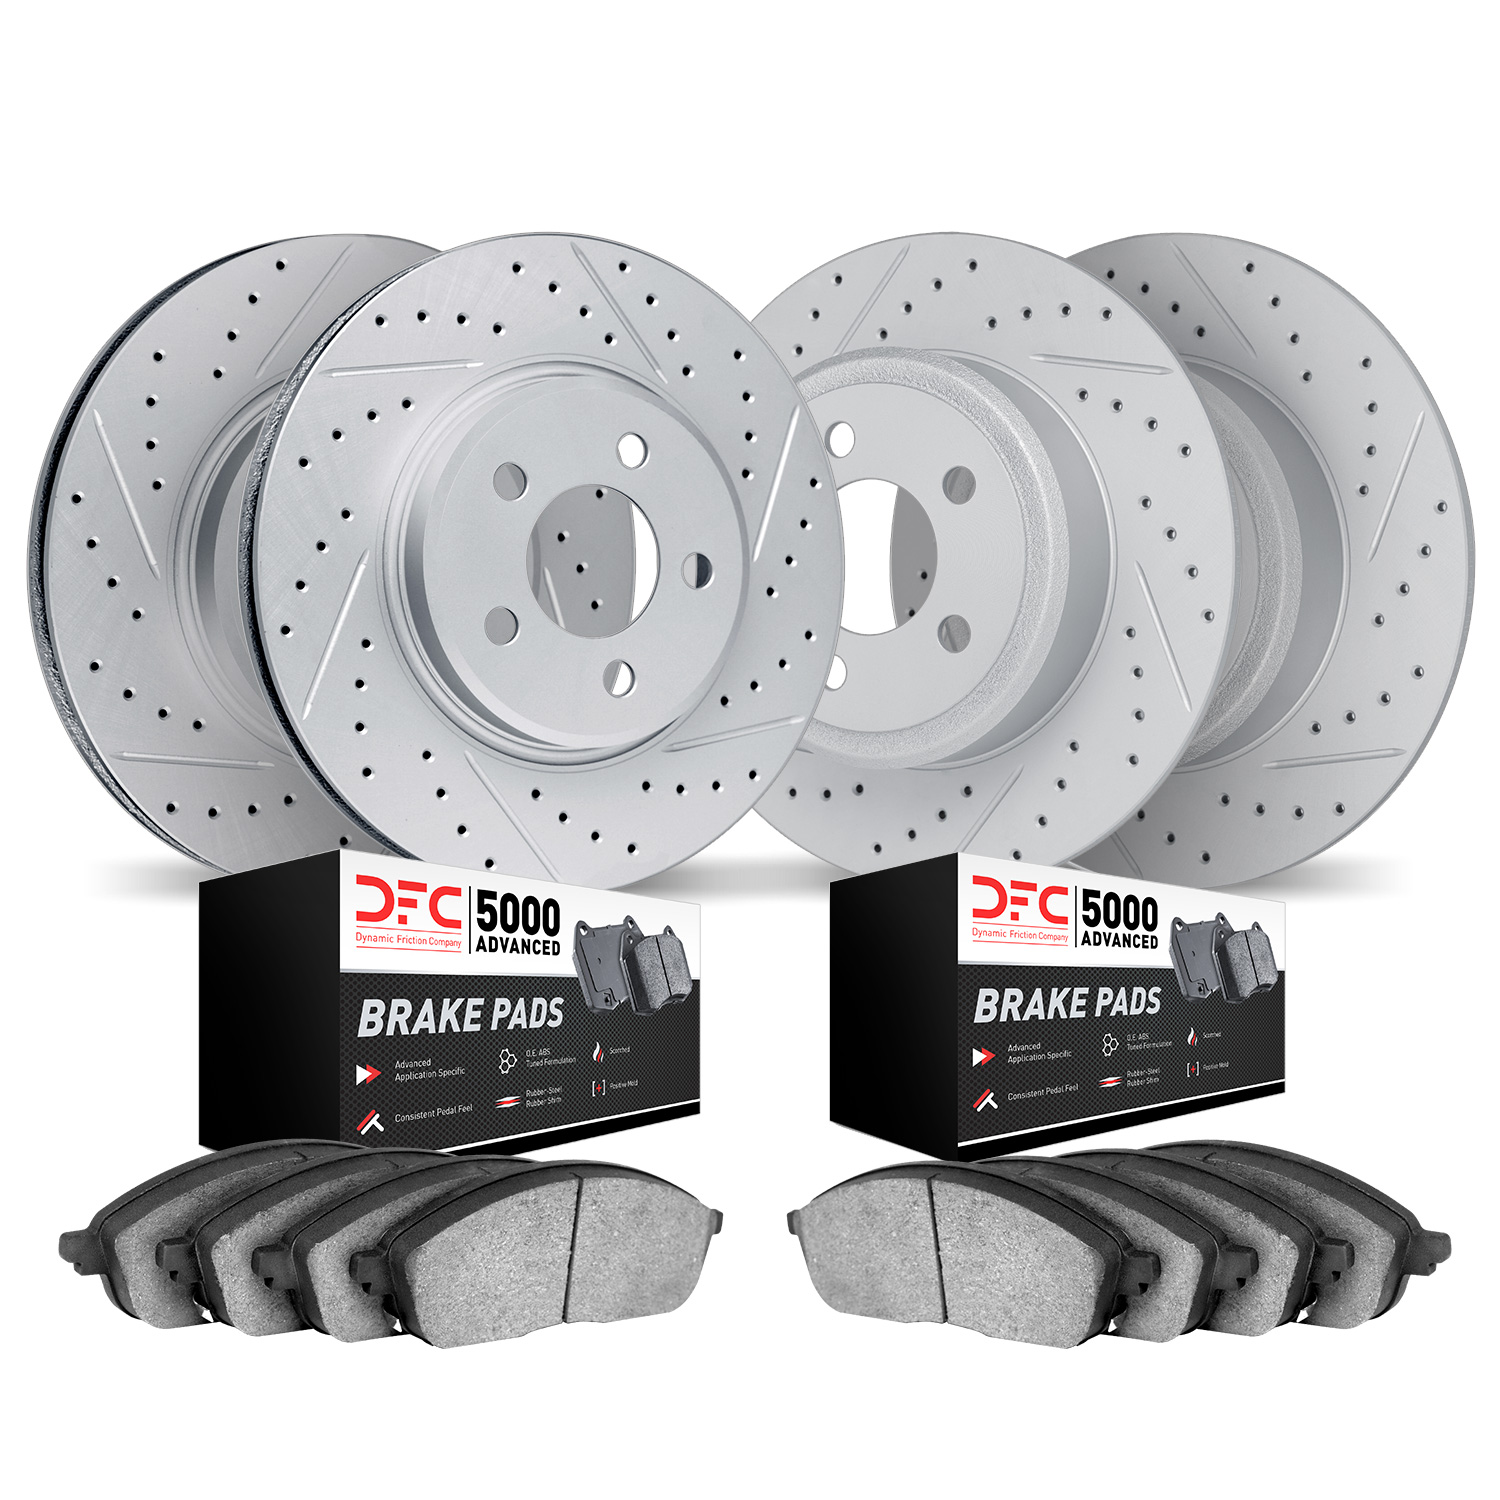 2504-13046 Geoperformance Drilled/Slotted Rotors w/5000 Advanced Brake Pads Kit, 2013-2018 Subaru, Position: Front and Rear